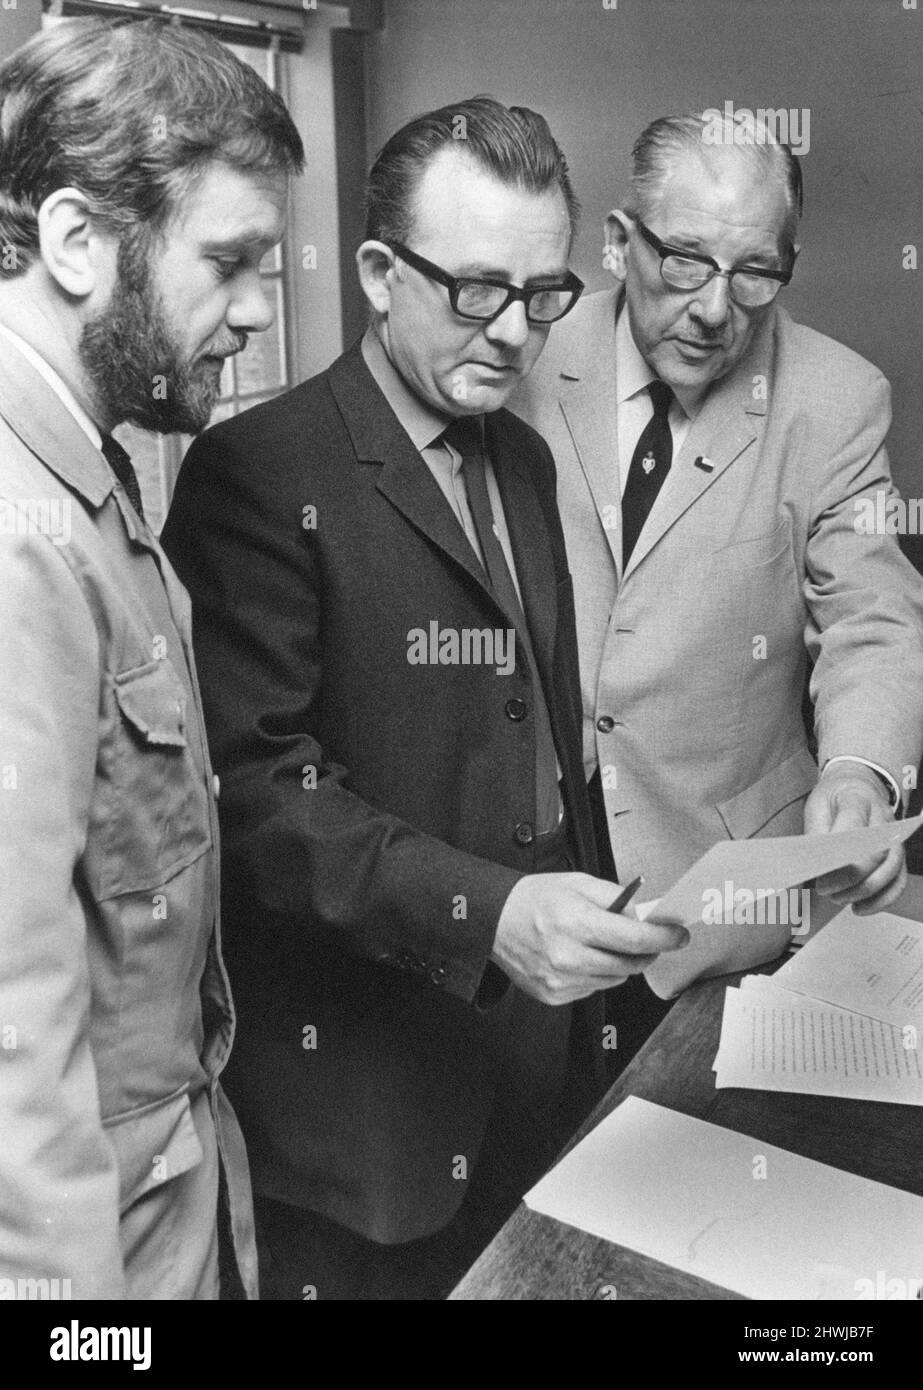 Jack Brooks, Baron Brooks of Tremorfa (1979), (centre) pictured at morning news press conference given by the Welsh Trade Union and Labour Committee, formed to fight against Britain's entry into the Common Market. Left to right, Paddy Kitson, Field organiser, Jack Brooks, Chairman and F. G. Tyrrell, Secretary. The conference was held at Transport House, Charles Street, Cardiff, Wales, 29th July 1971. Stock Photo